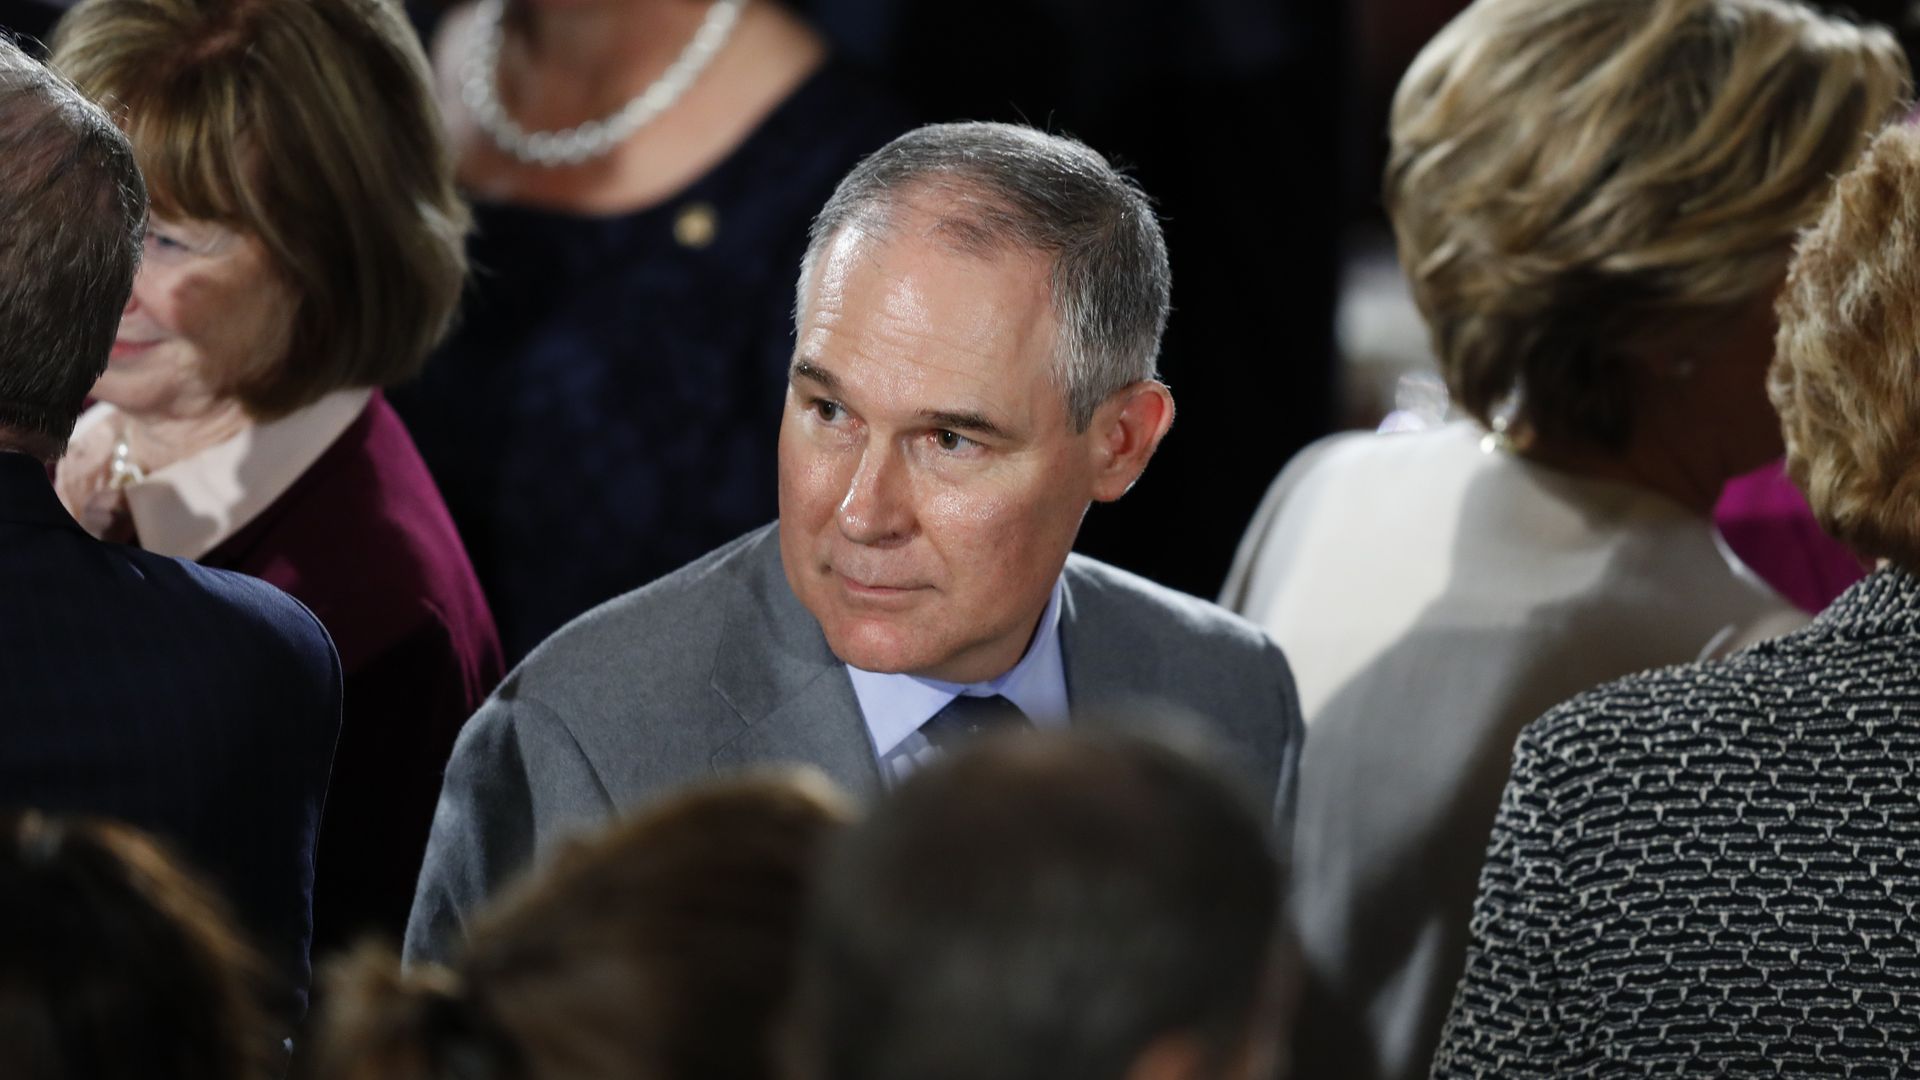 EPA administrator Scott Pruitt looks over his shoulder in a crowd